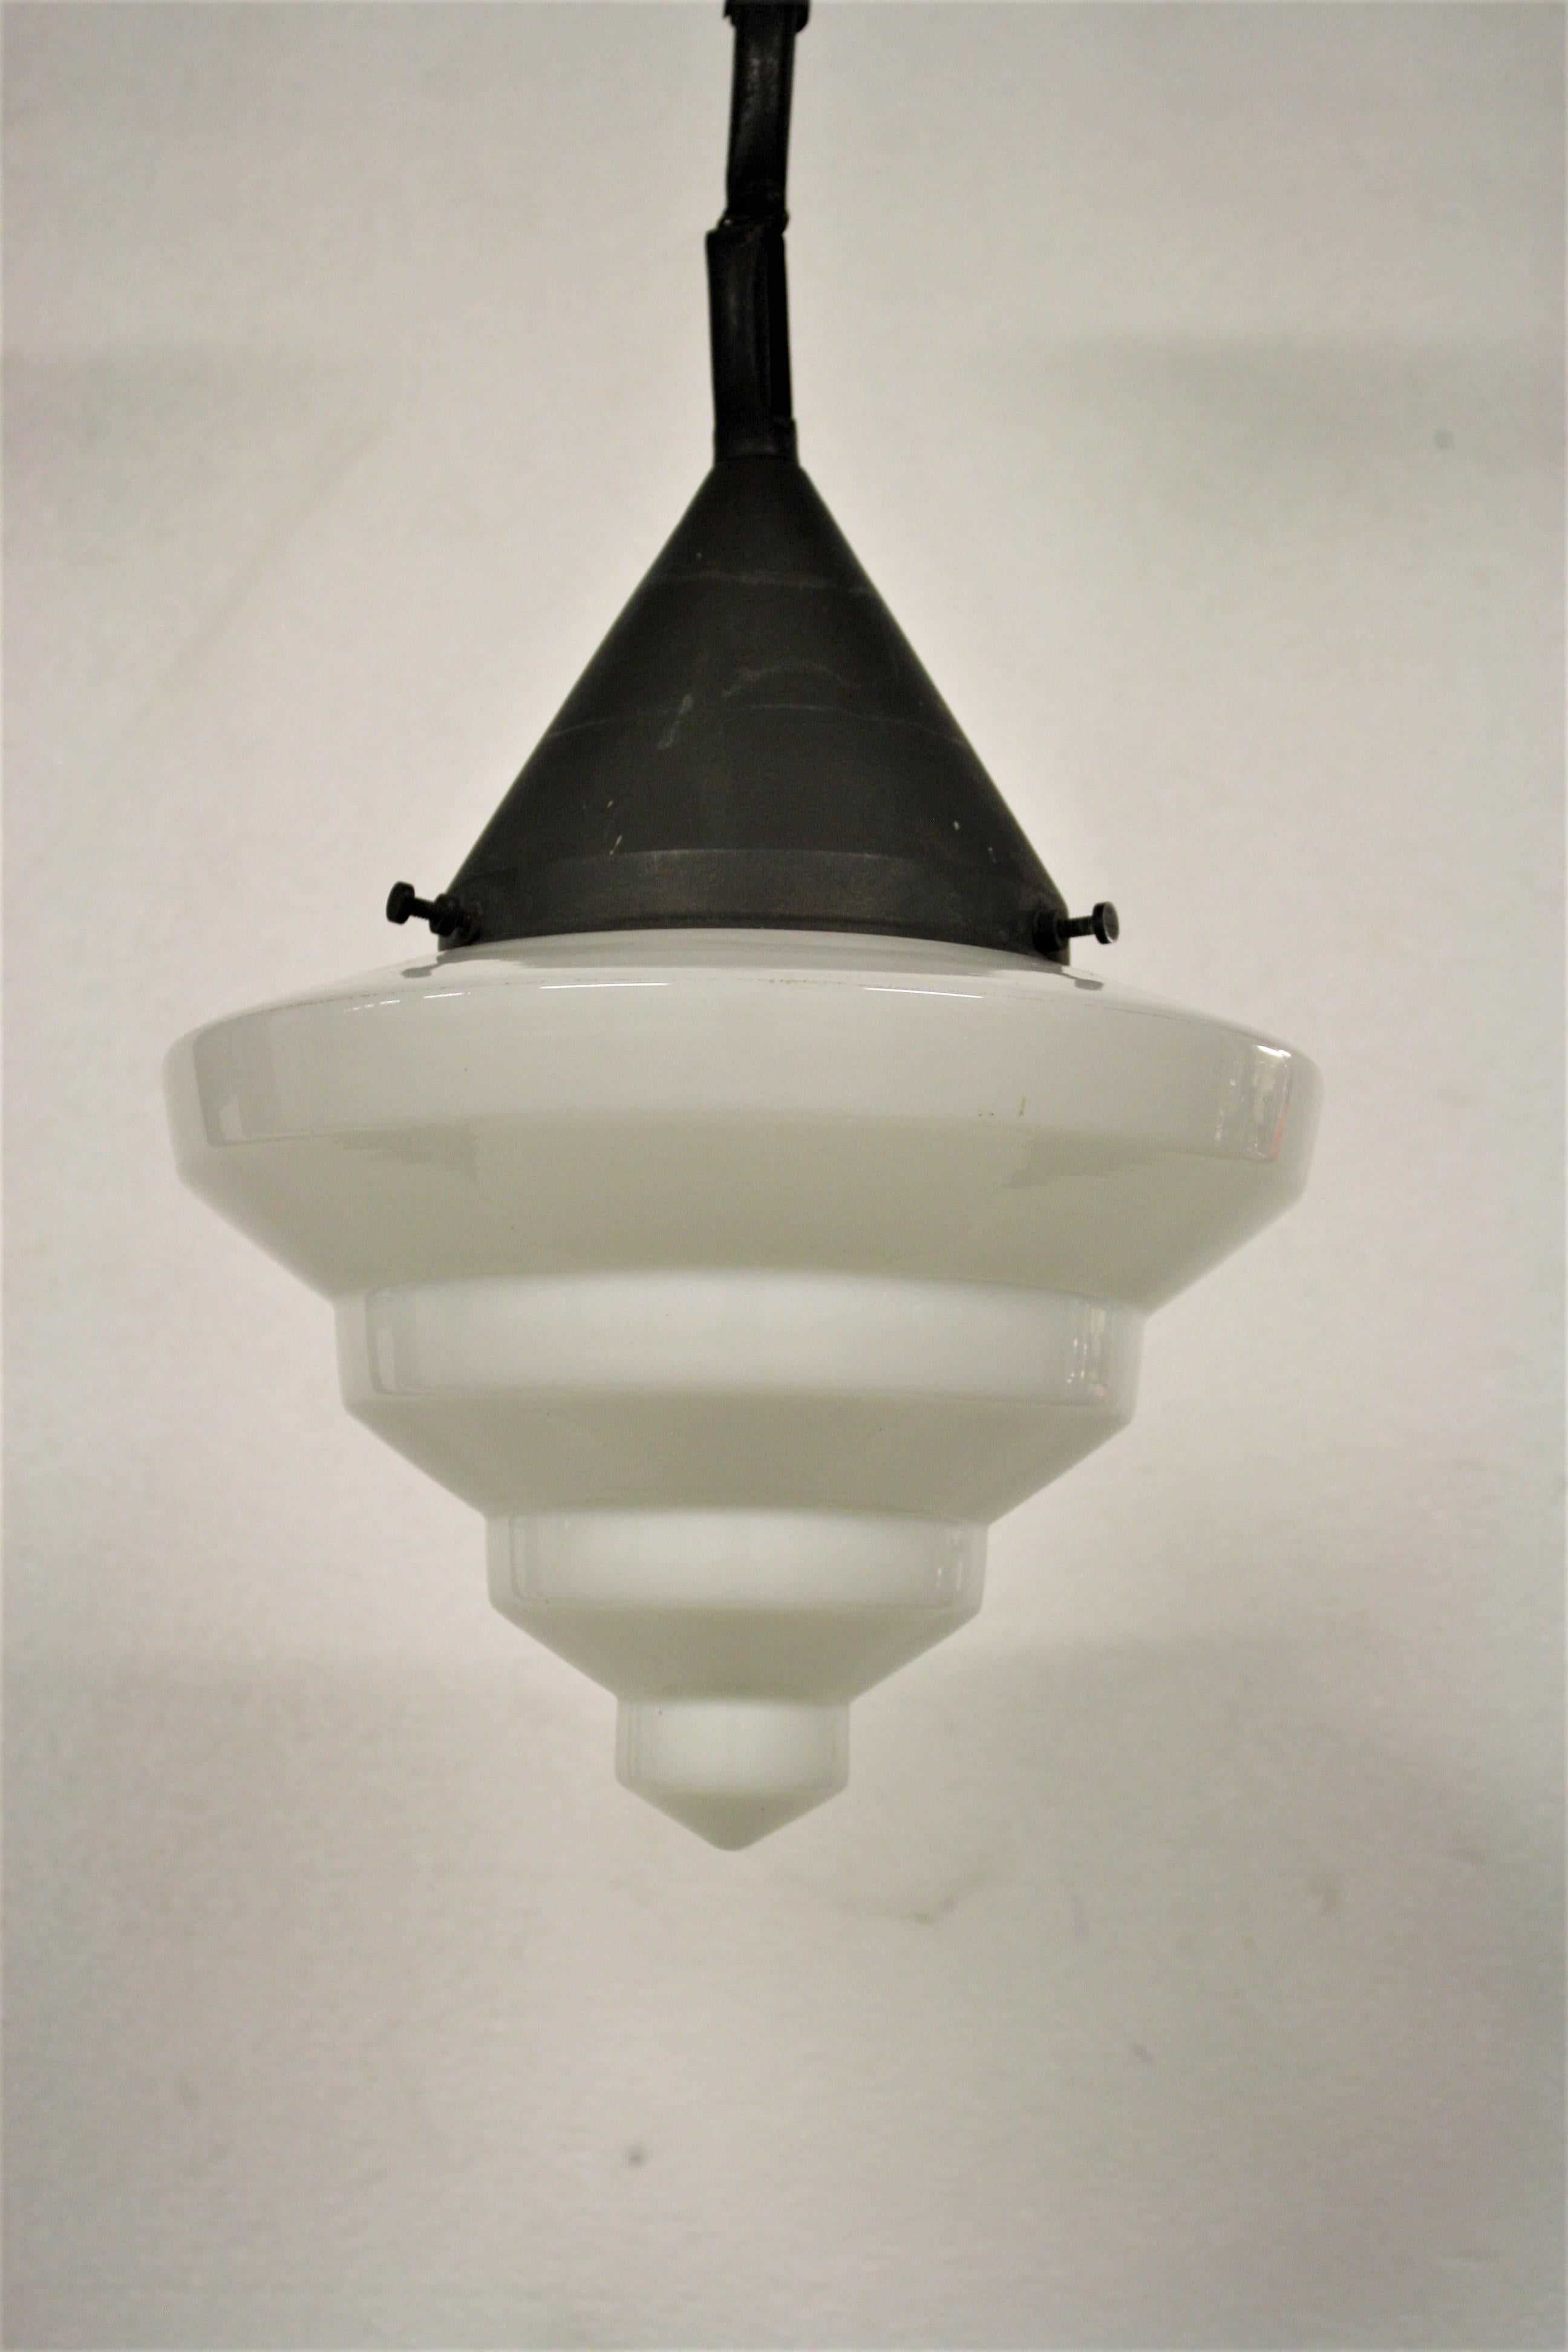 Antique conical Art Deco era opaline pendant light.

The lamp has a typical stepped Art Deco design pattern.

Supplied with origanl chain and shade holder.

Rewired, tested and ready to use with a regular E27 light bulb.

1930s,